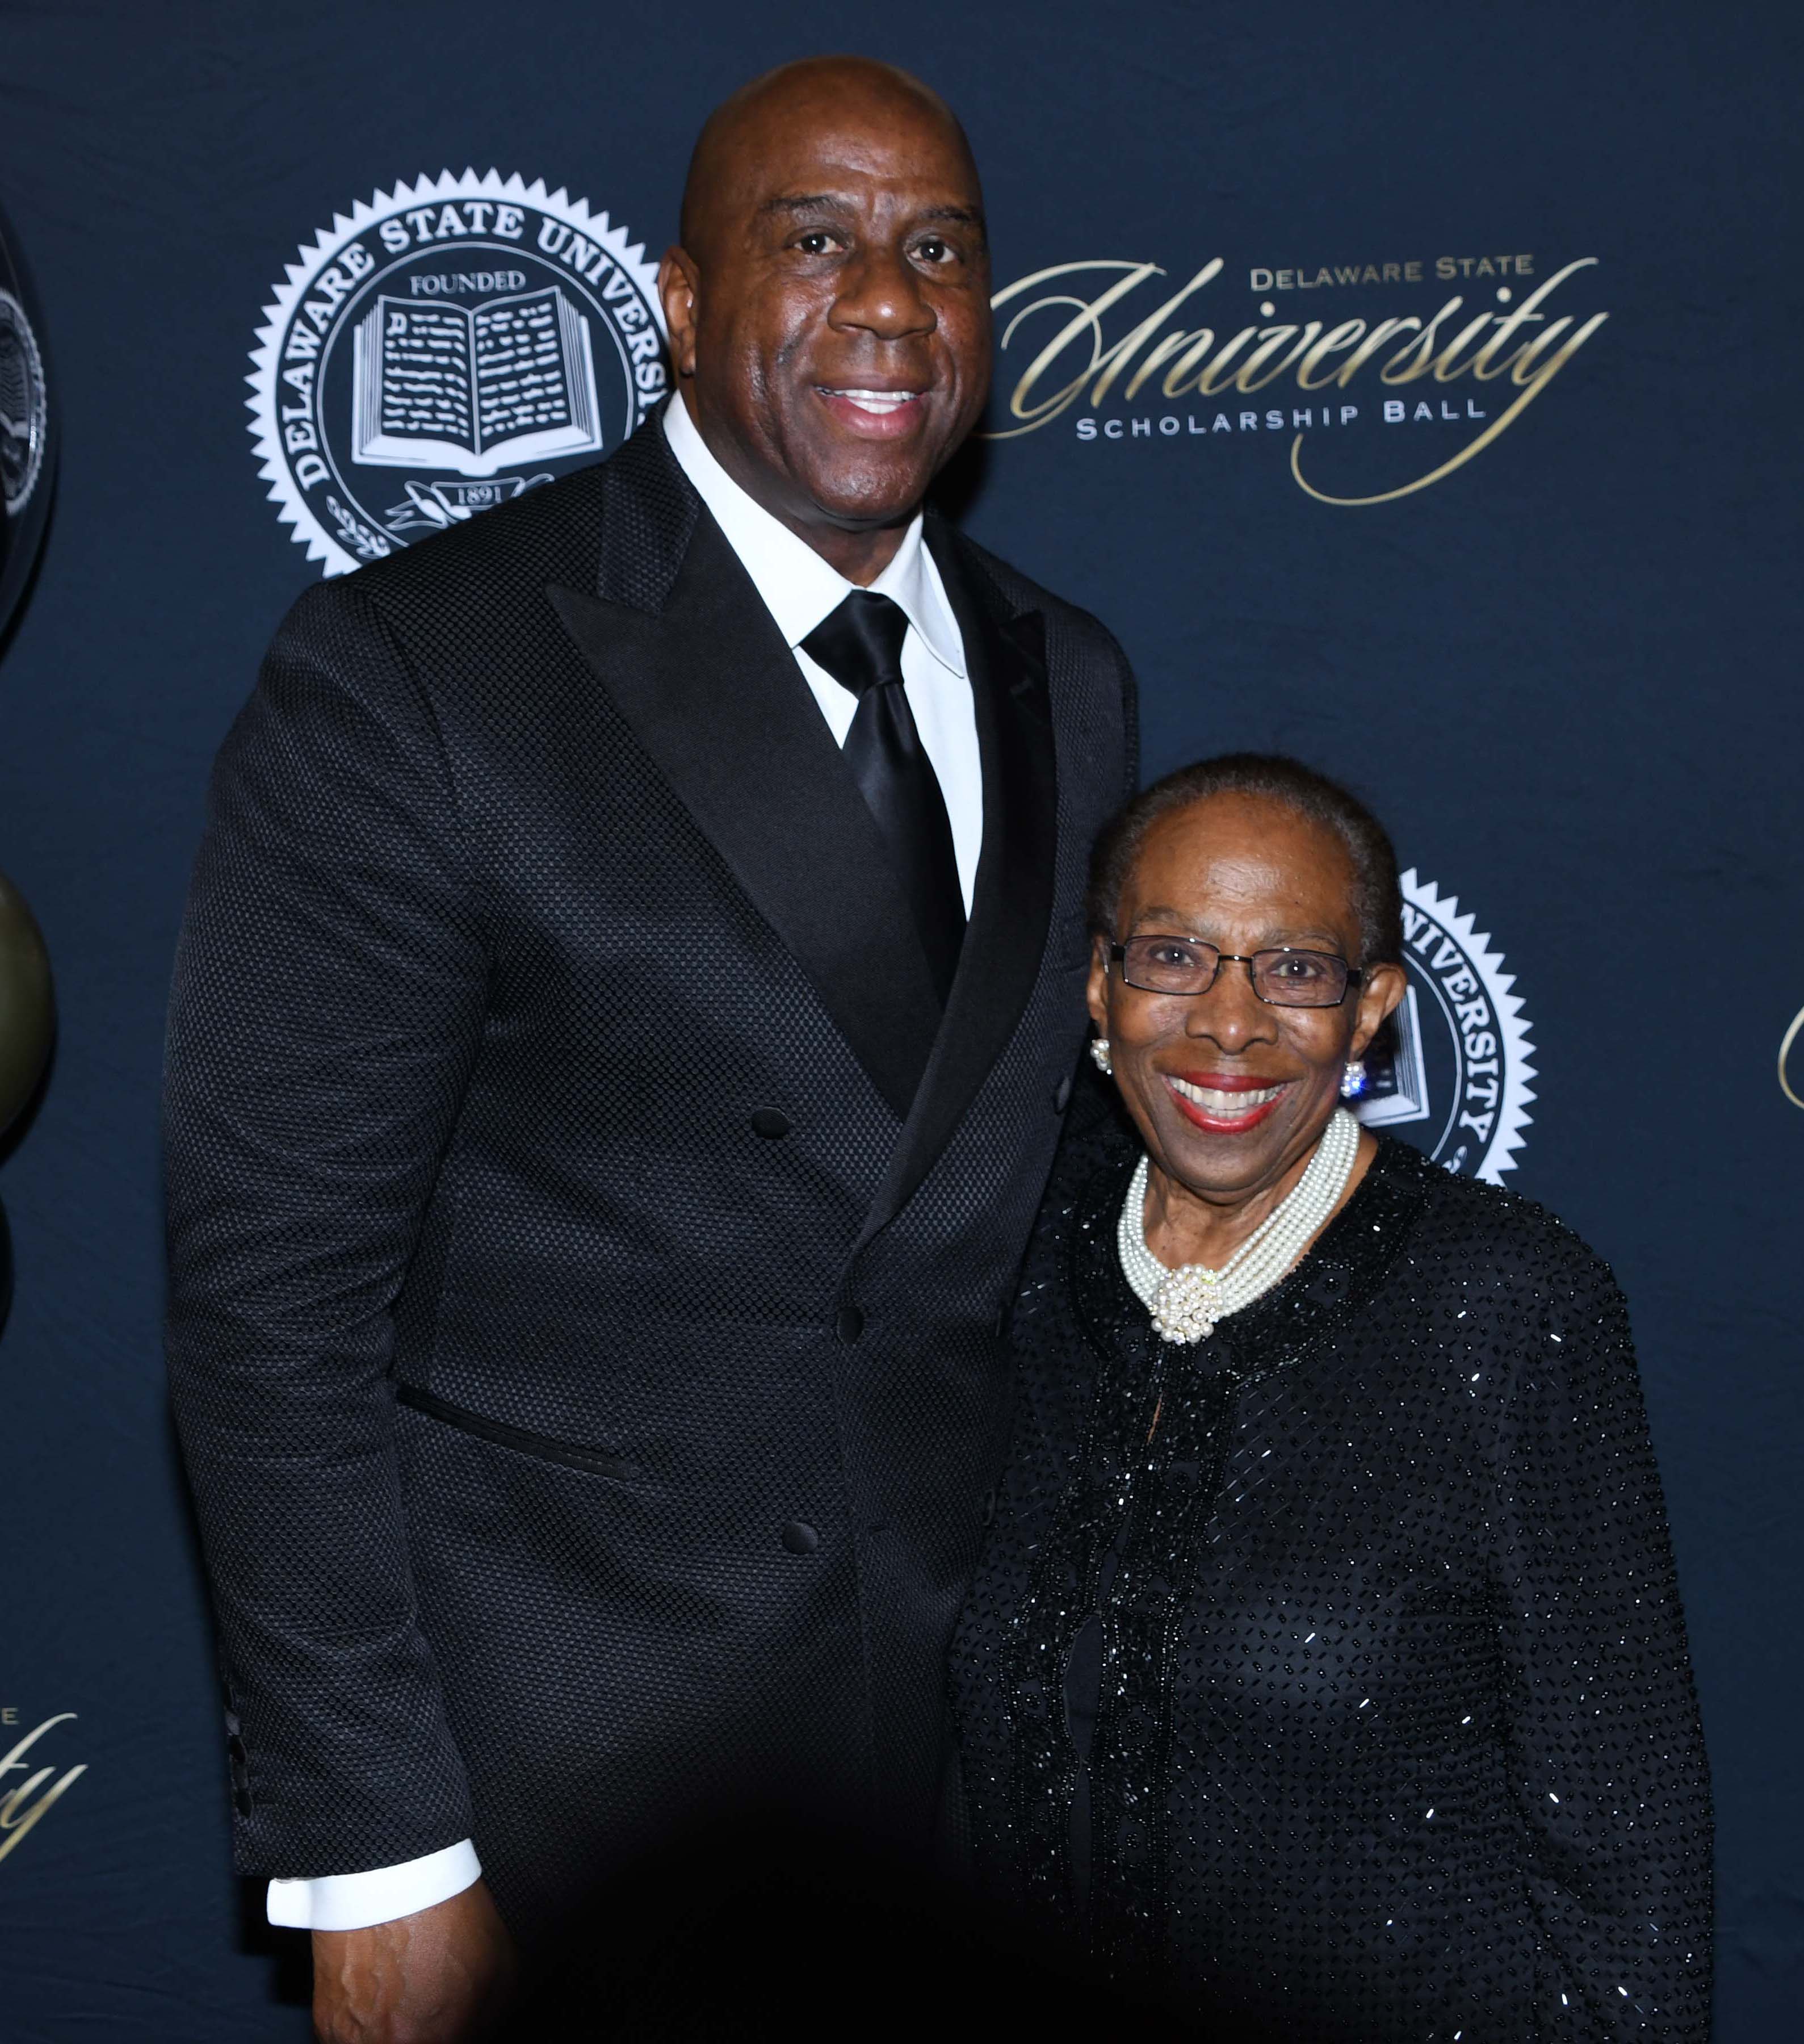 Magic Johnson took a lot of photos with a lot of people, including this one with DSU alumna Dr. Reba Hollingsworth, '48.